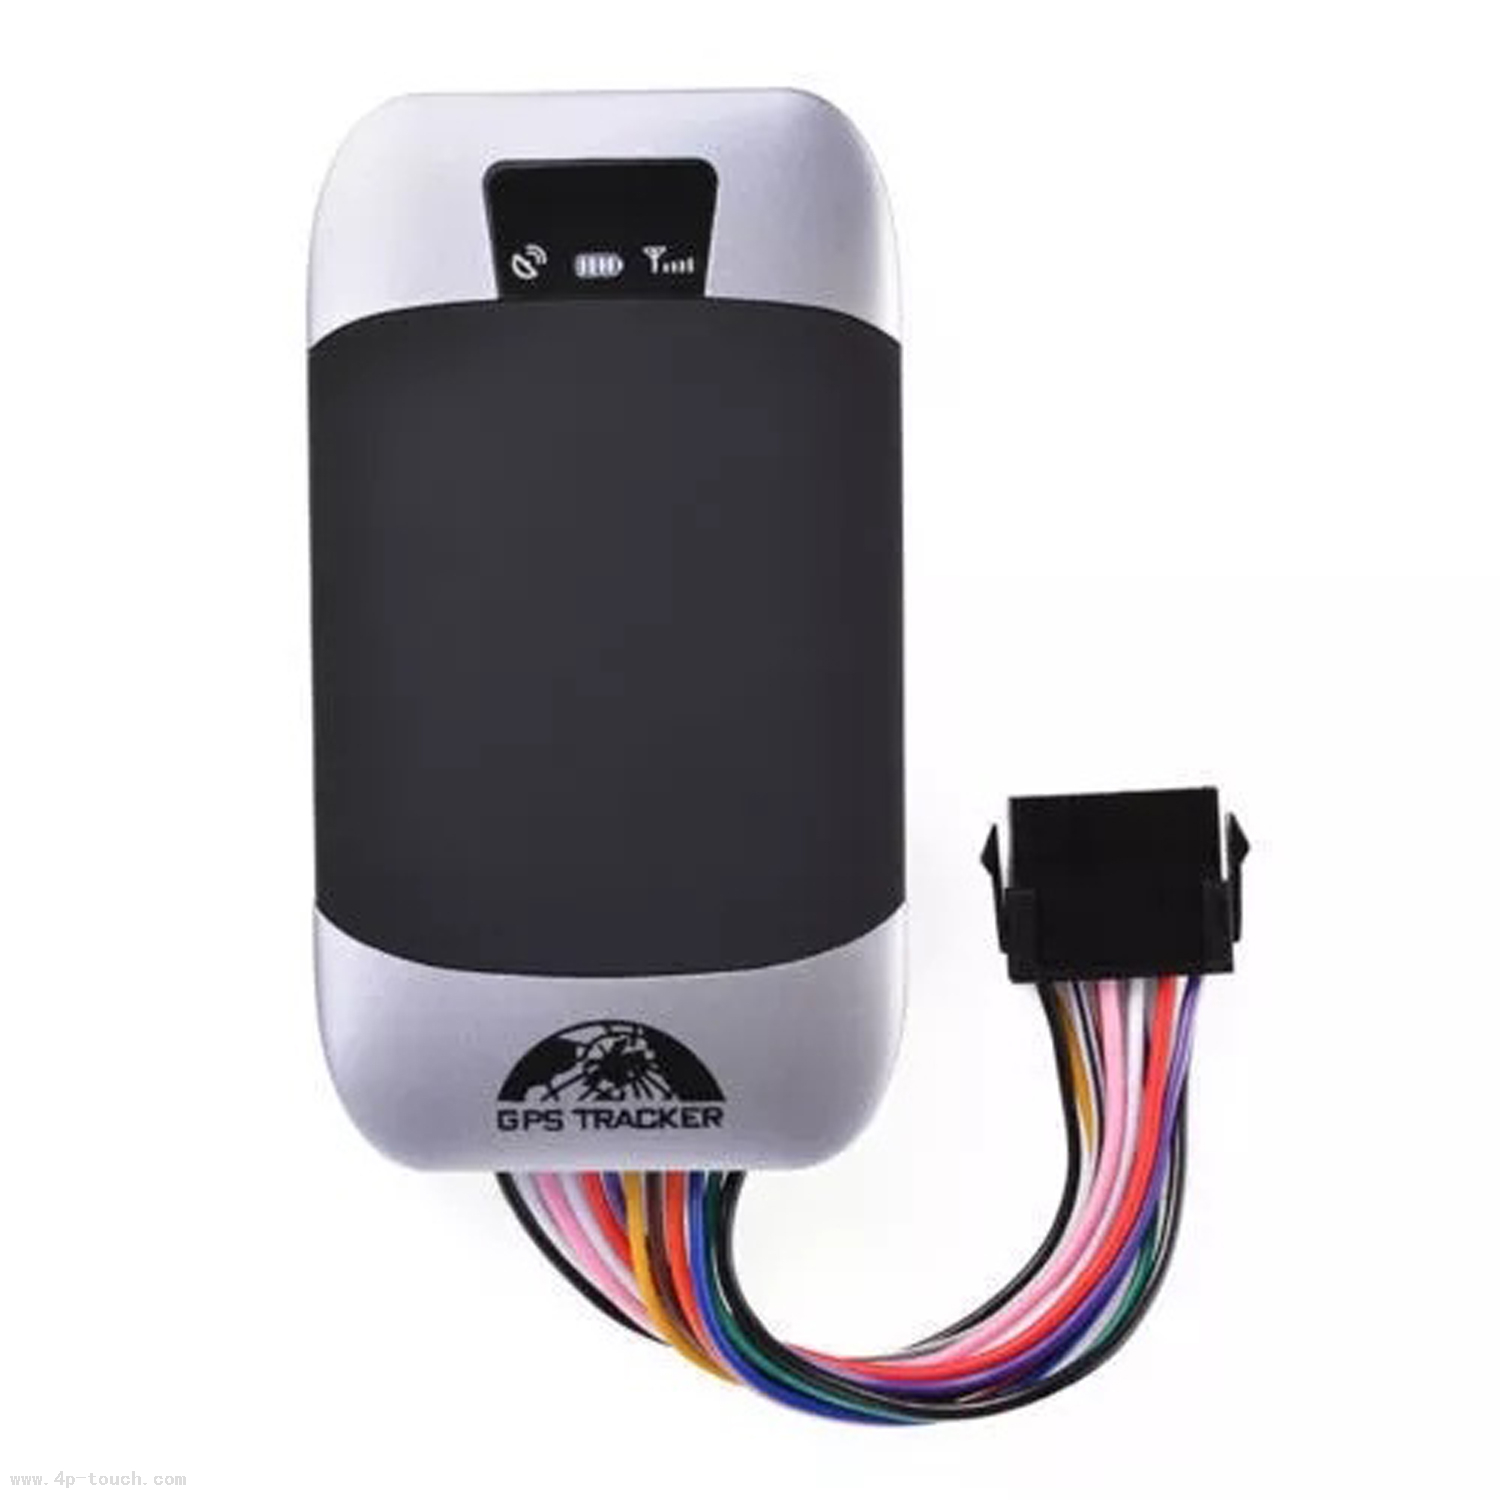 WCDMA Waterproof Vehicle GPS tracking device with Remote Cut off engine 